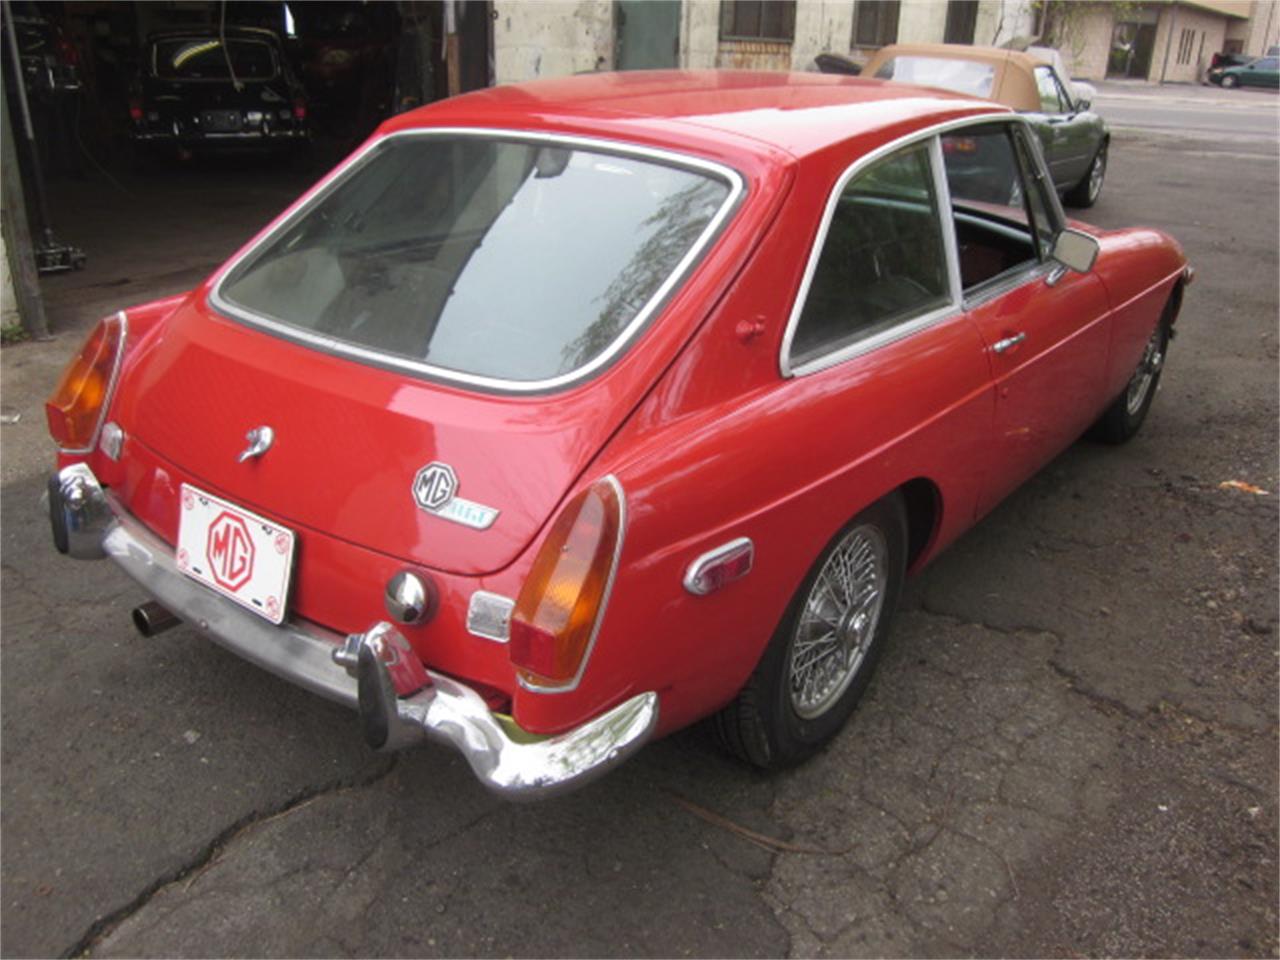 1974 MG MGB GT for sale in Stratford, CT – photo 3